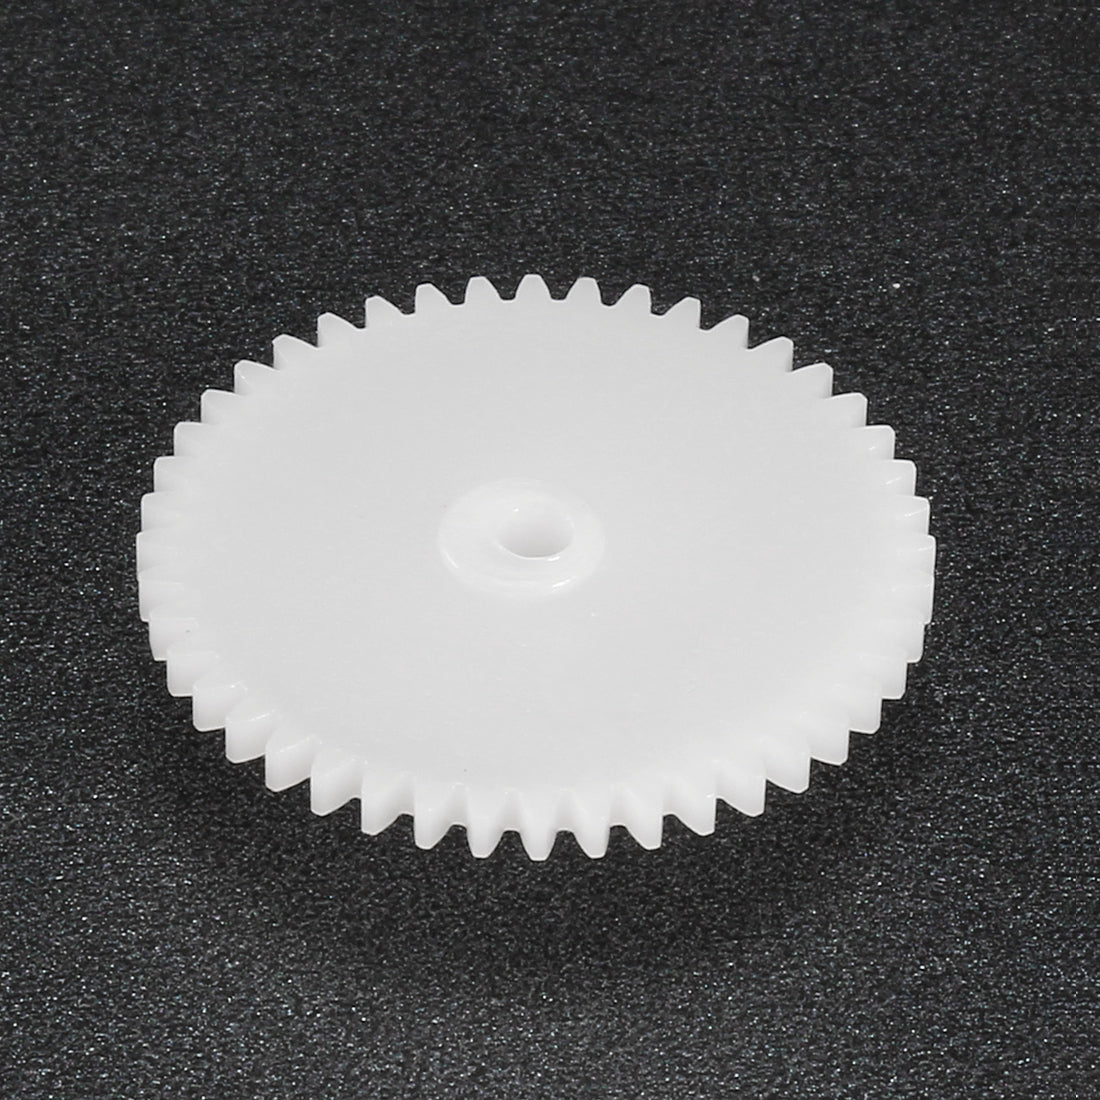 uxcell Uxcell 10Pcs 34102B Plastic Gear Accessories with 34 Teeth for DIY Car Robot Motor